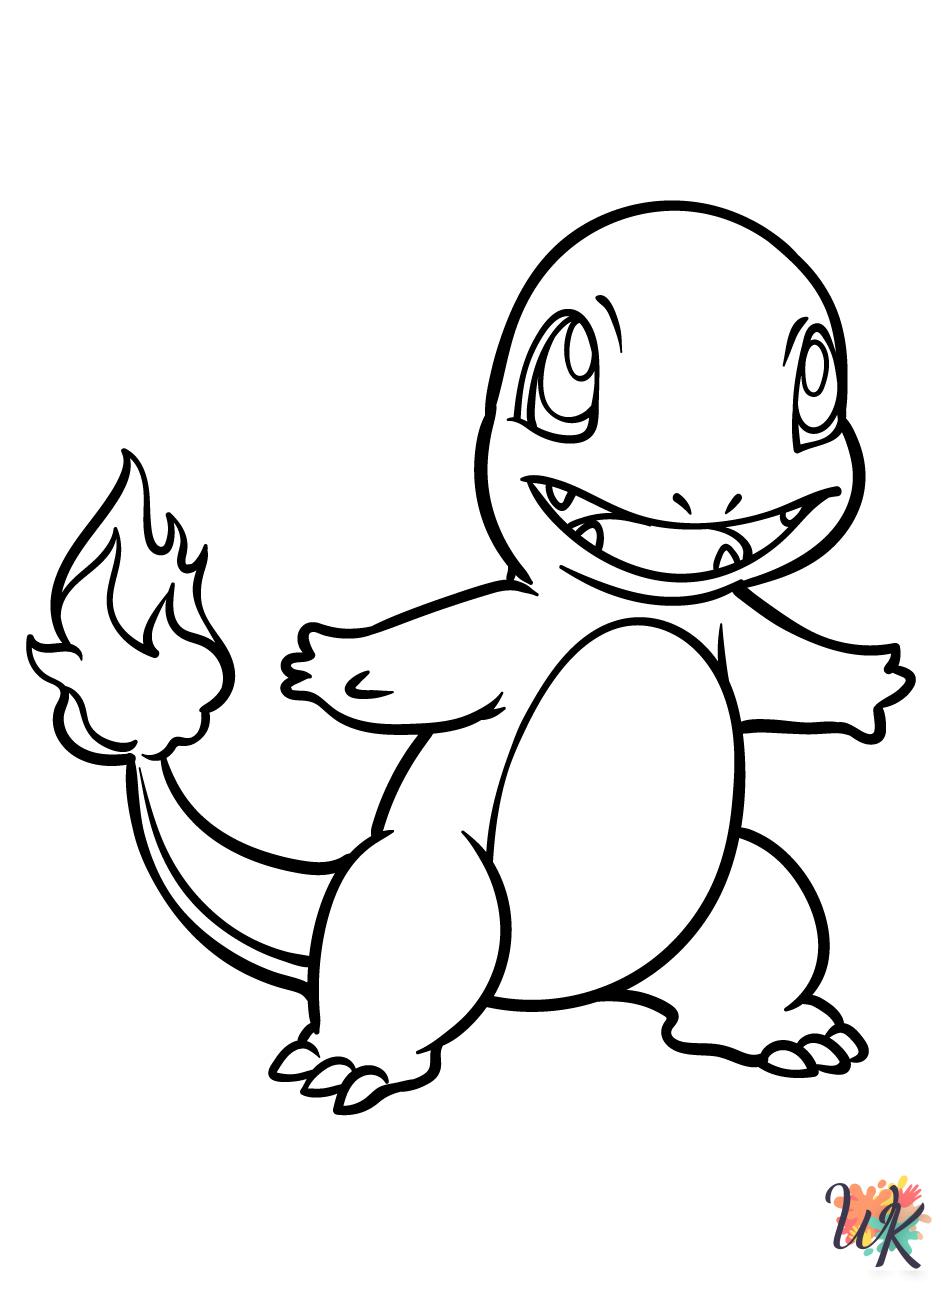 Charmander coloring pages printable